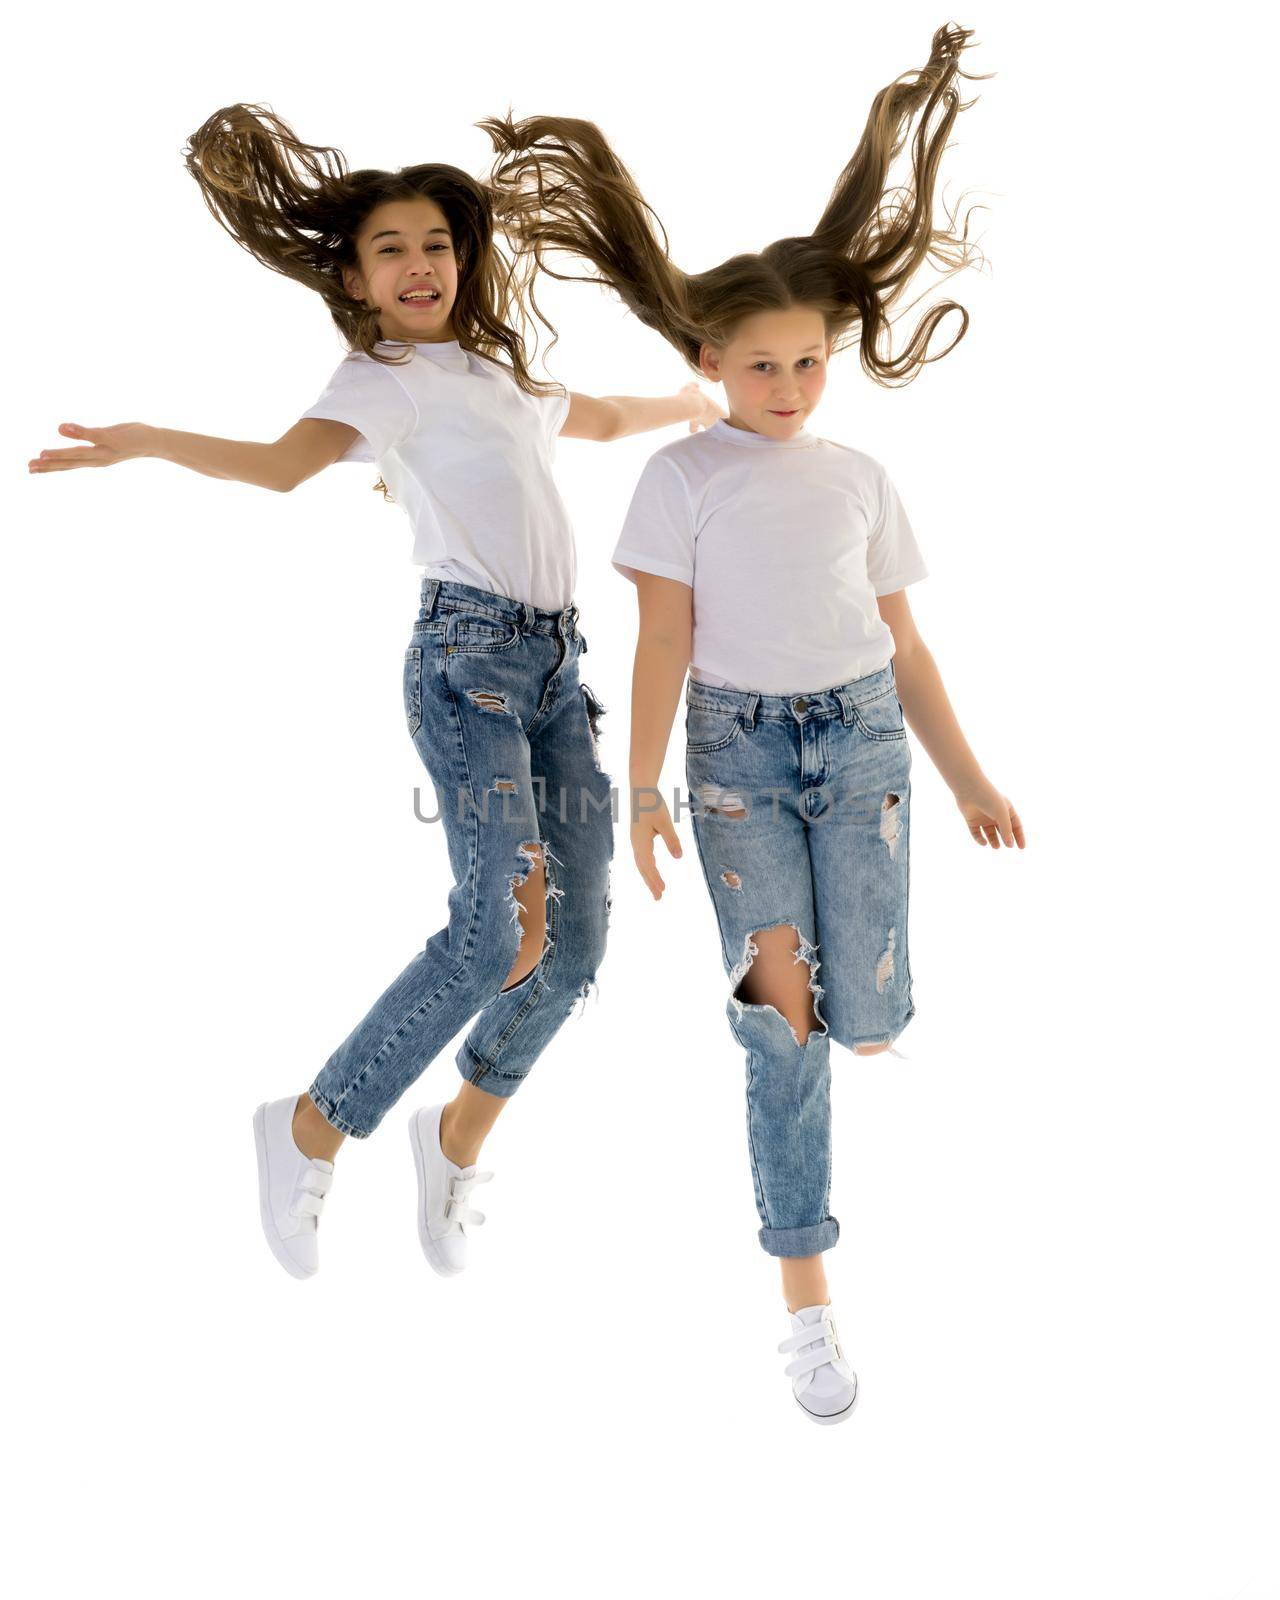 Two cheerful little girls have fun jumping in the studio on a white background.